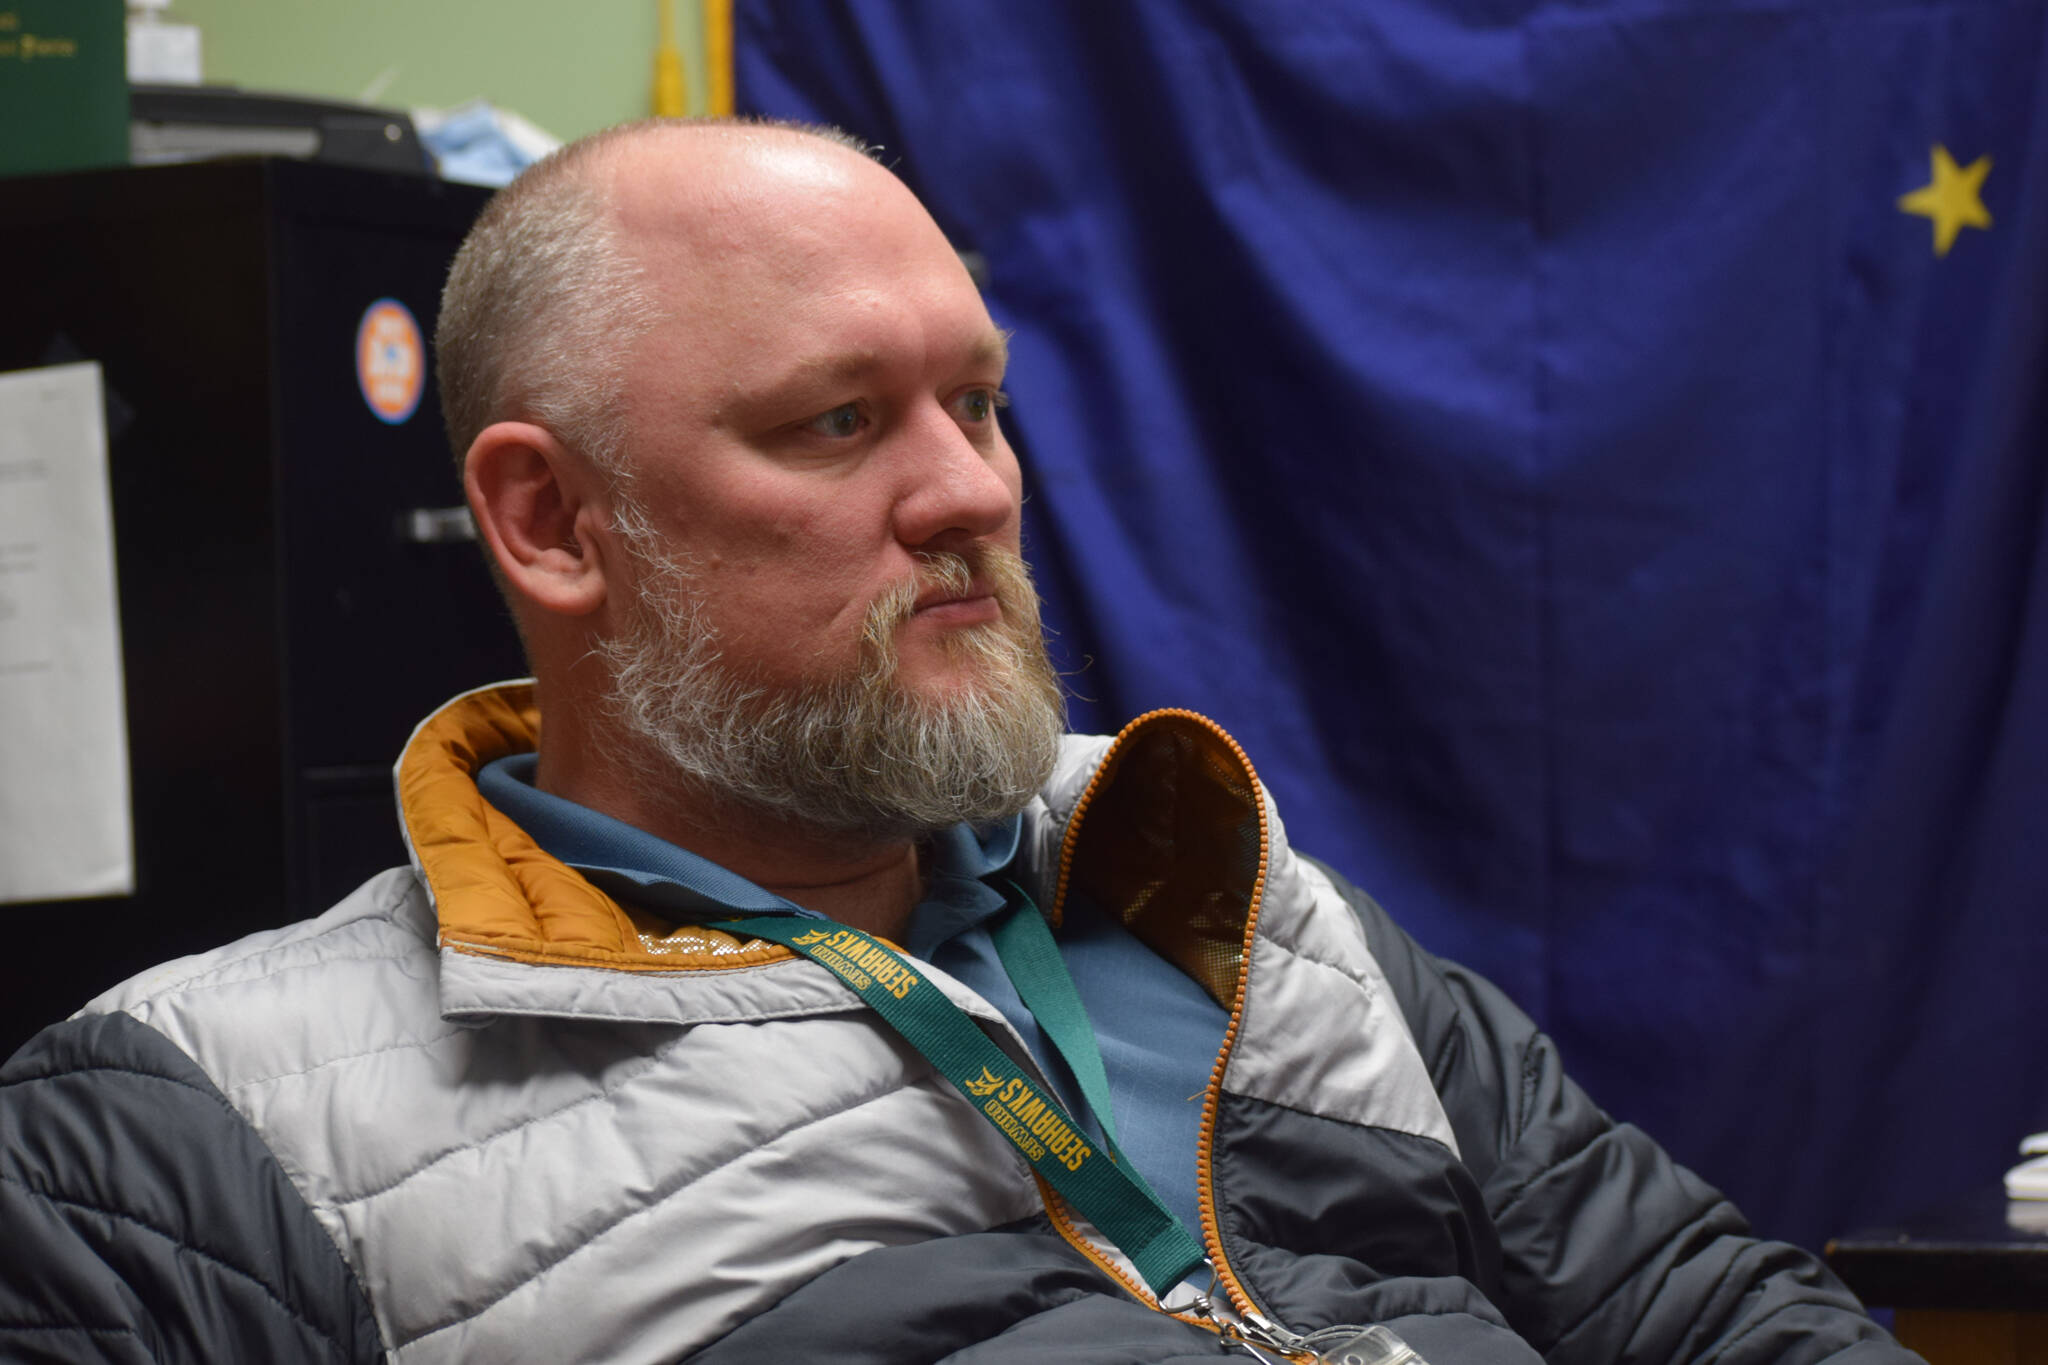 Henry Burns, principal of Seward High School, works in his office in in Seward, Alaska on Tuesday, May 3, 2022. (Camille Botello/Peninsula Clarion)